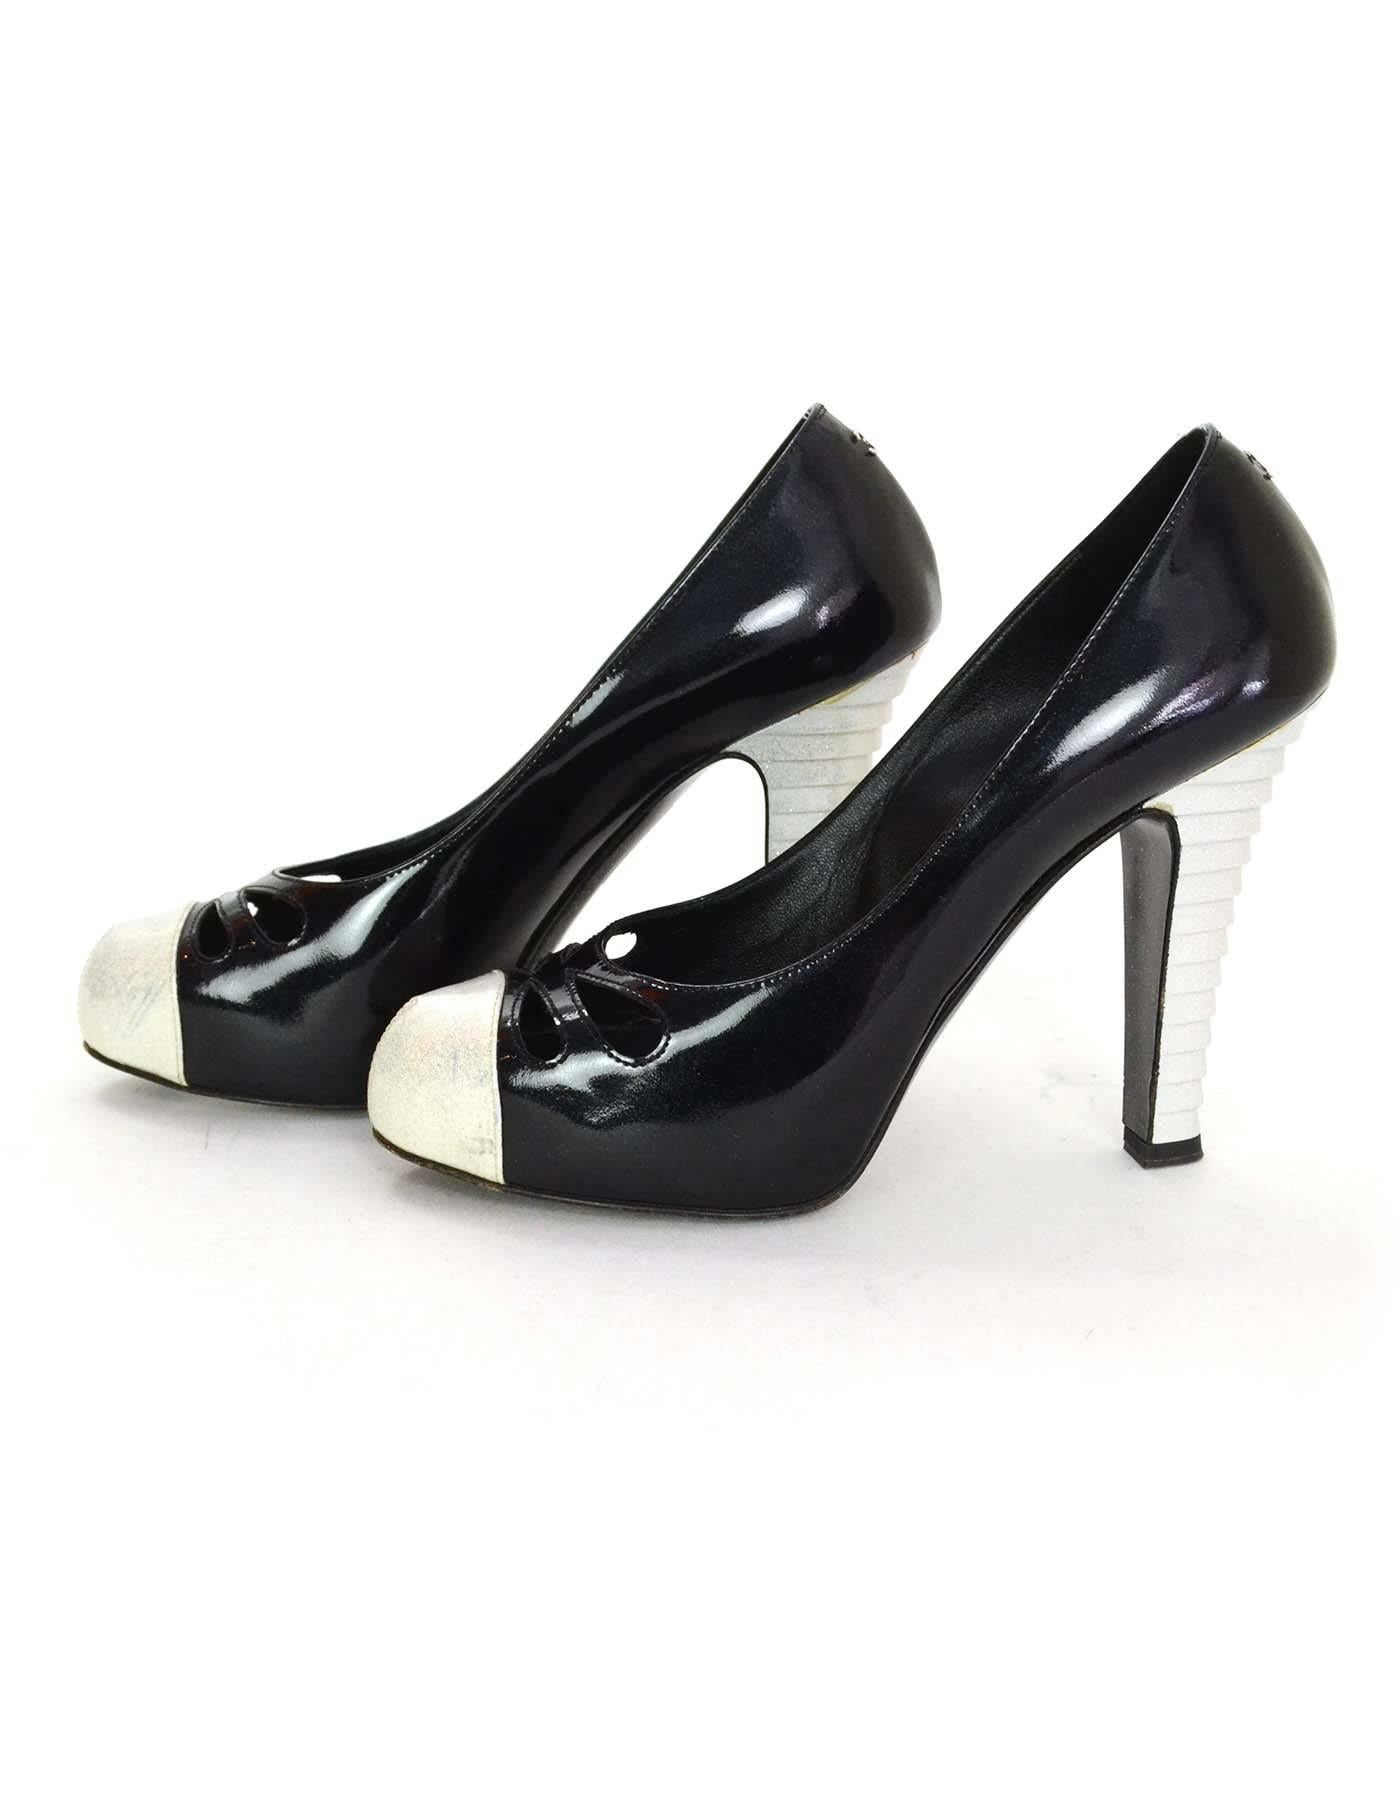 Chanel Black and White Glitter Cap Toe Pumps Sz 38

Features cut-out at toes, embellished heels and hidden platform

Made In: Italy
Color: Black and white
Materials: Patent leather
Closure/Opening: Slide on
Sole Stamp: CC Made in Italy